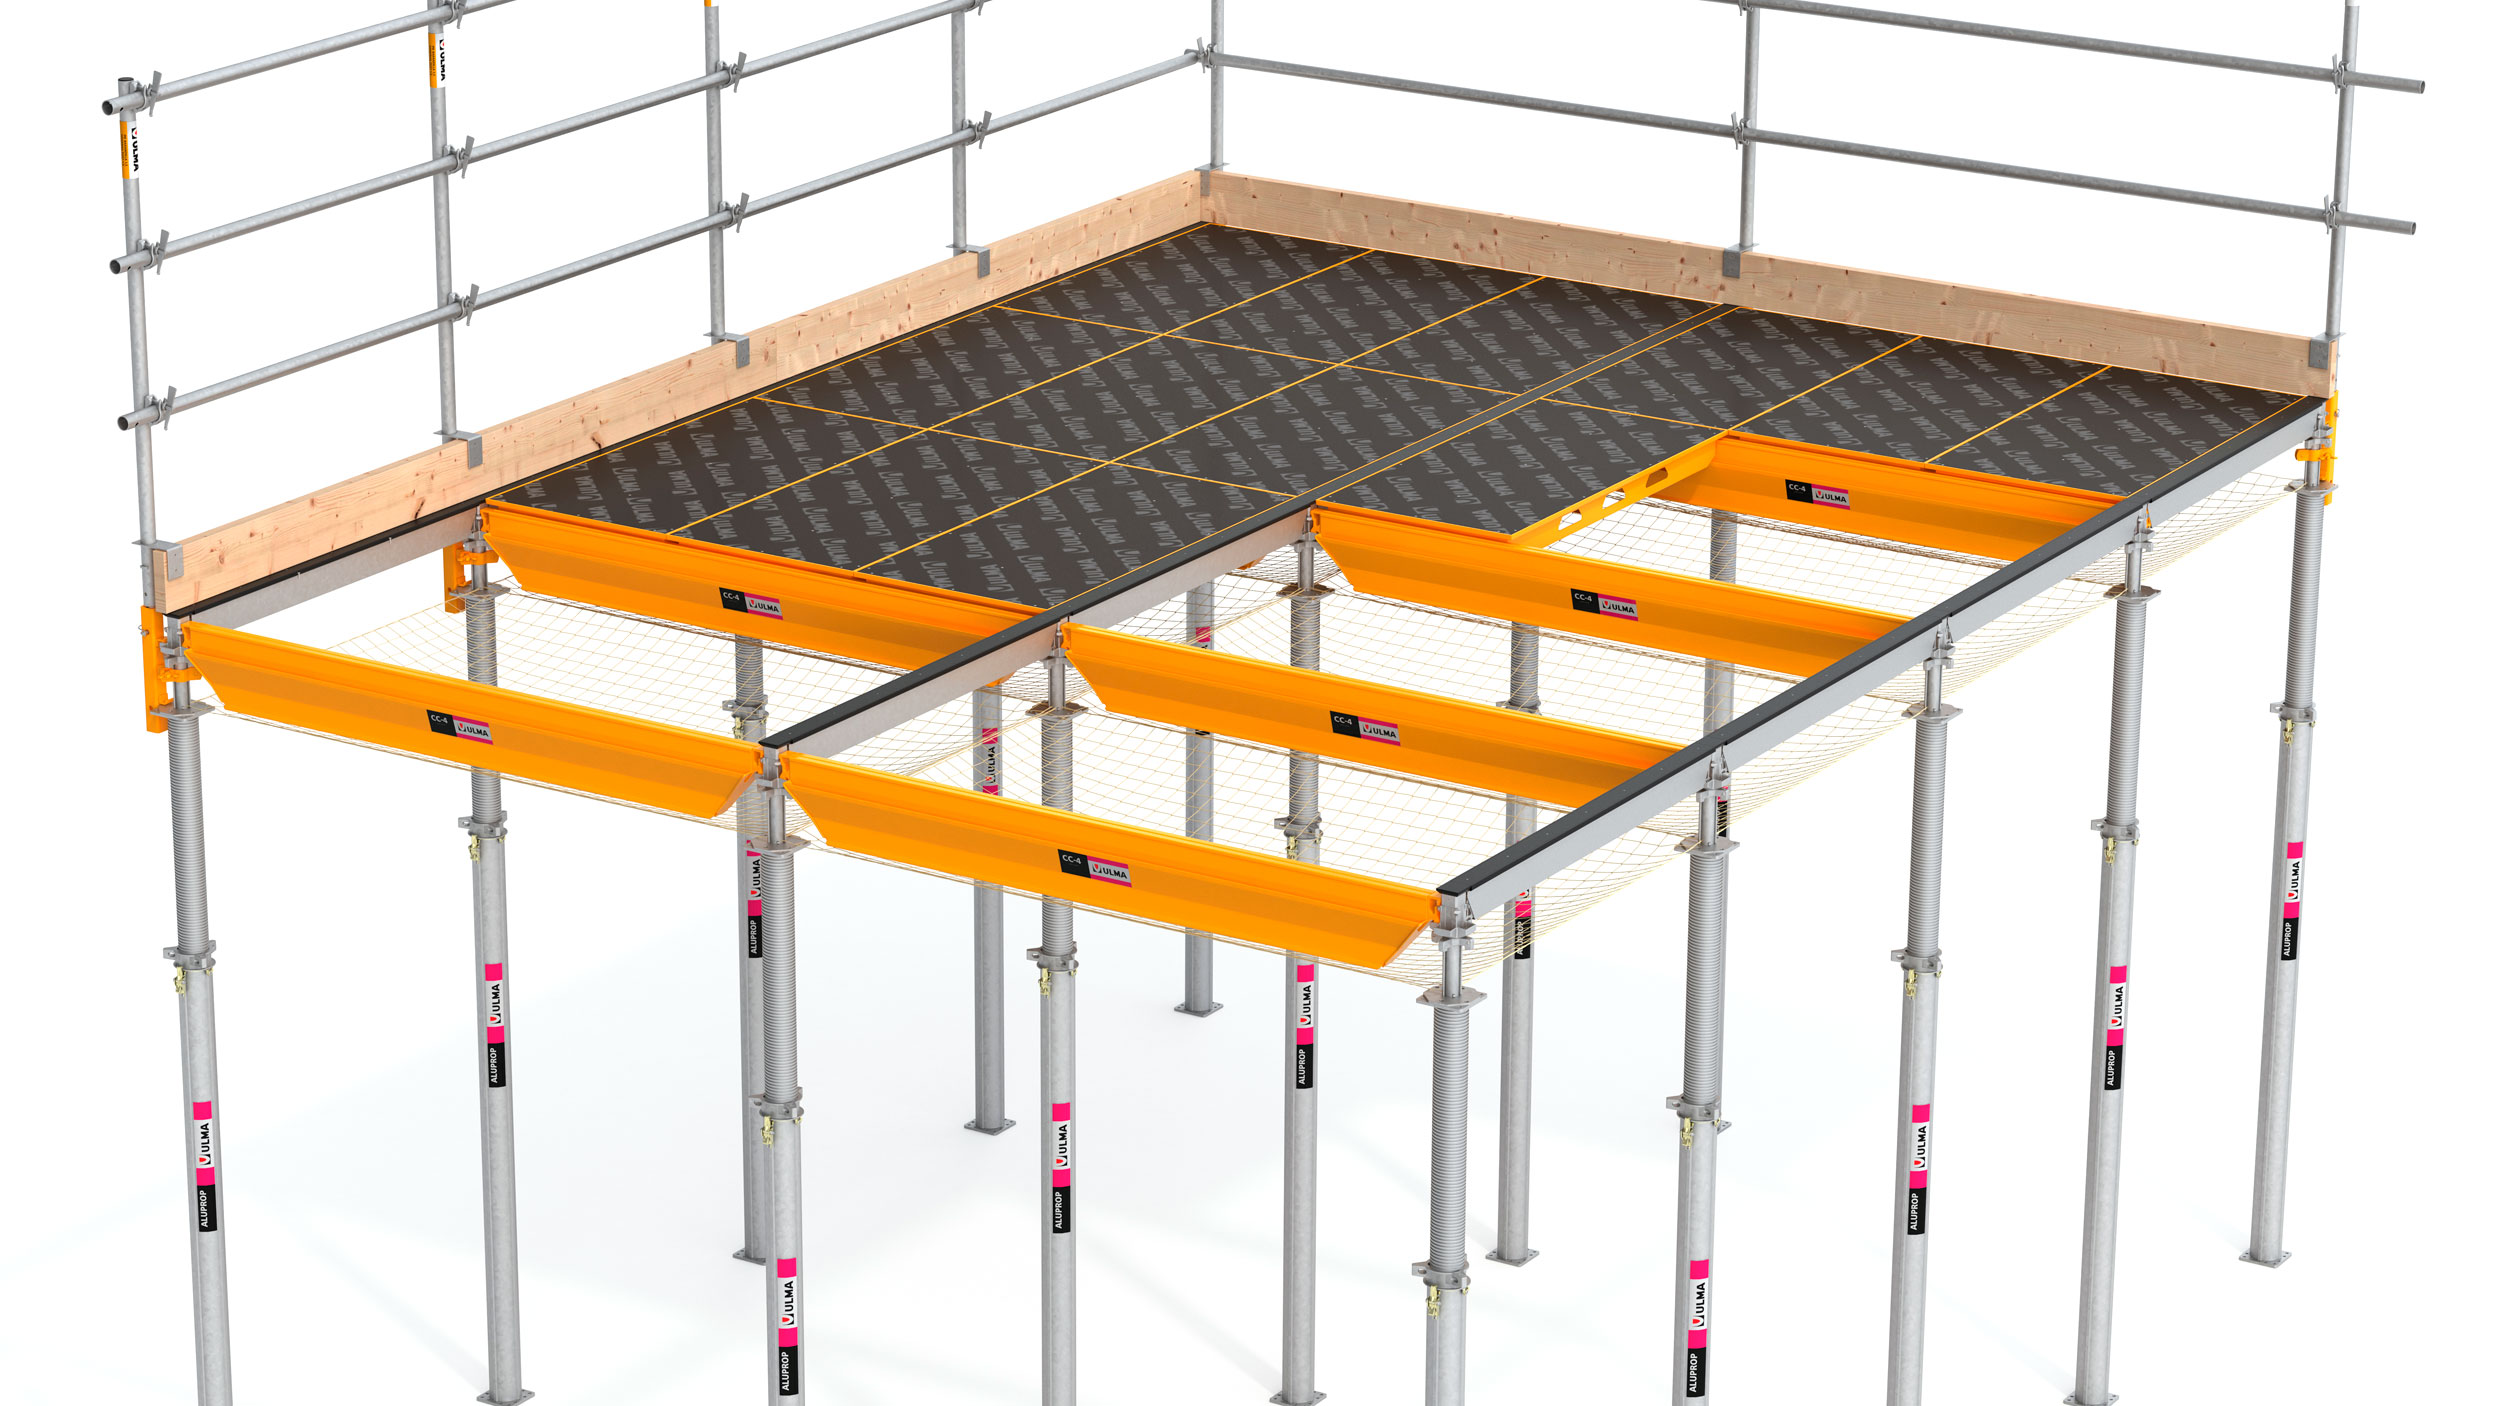 Fall protection equipment for the slab formwork assembly process. Simple installation.